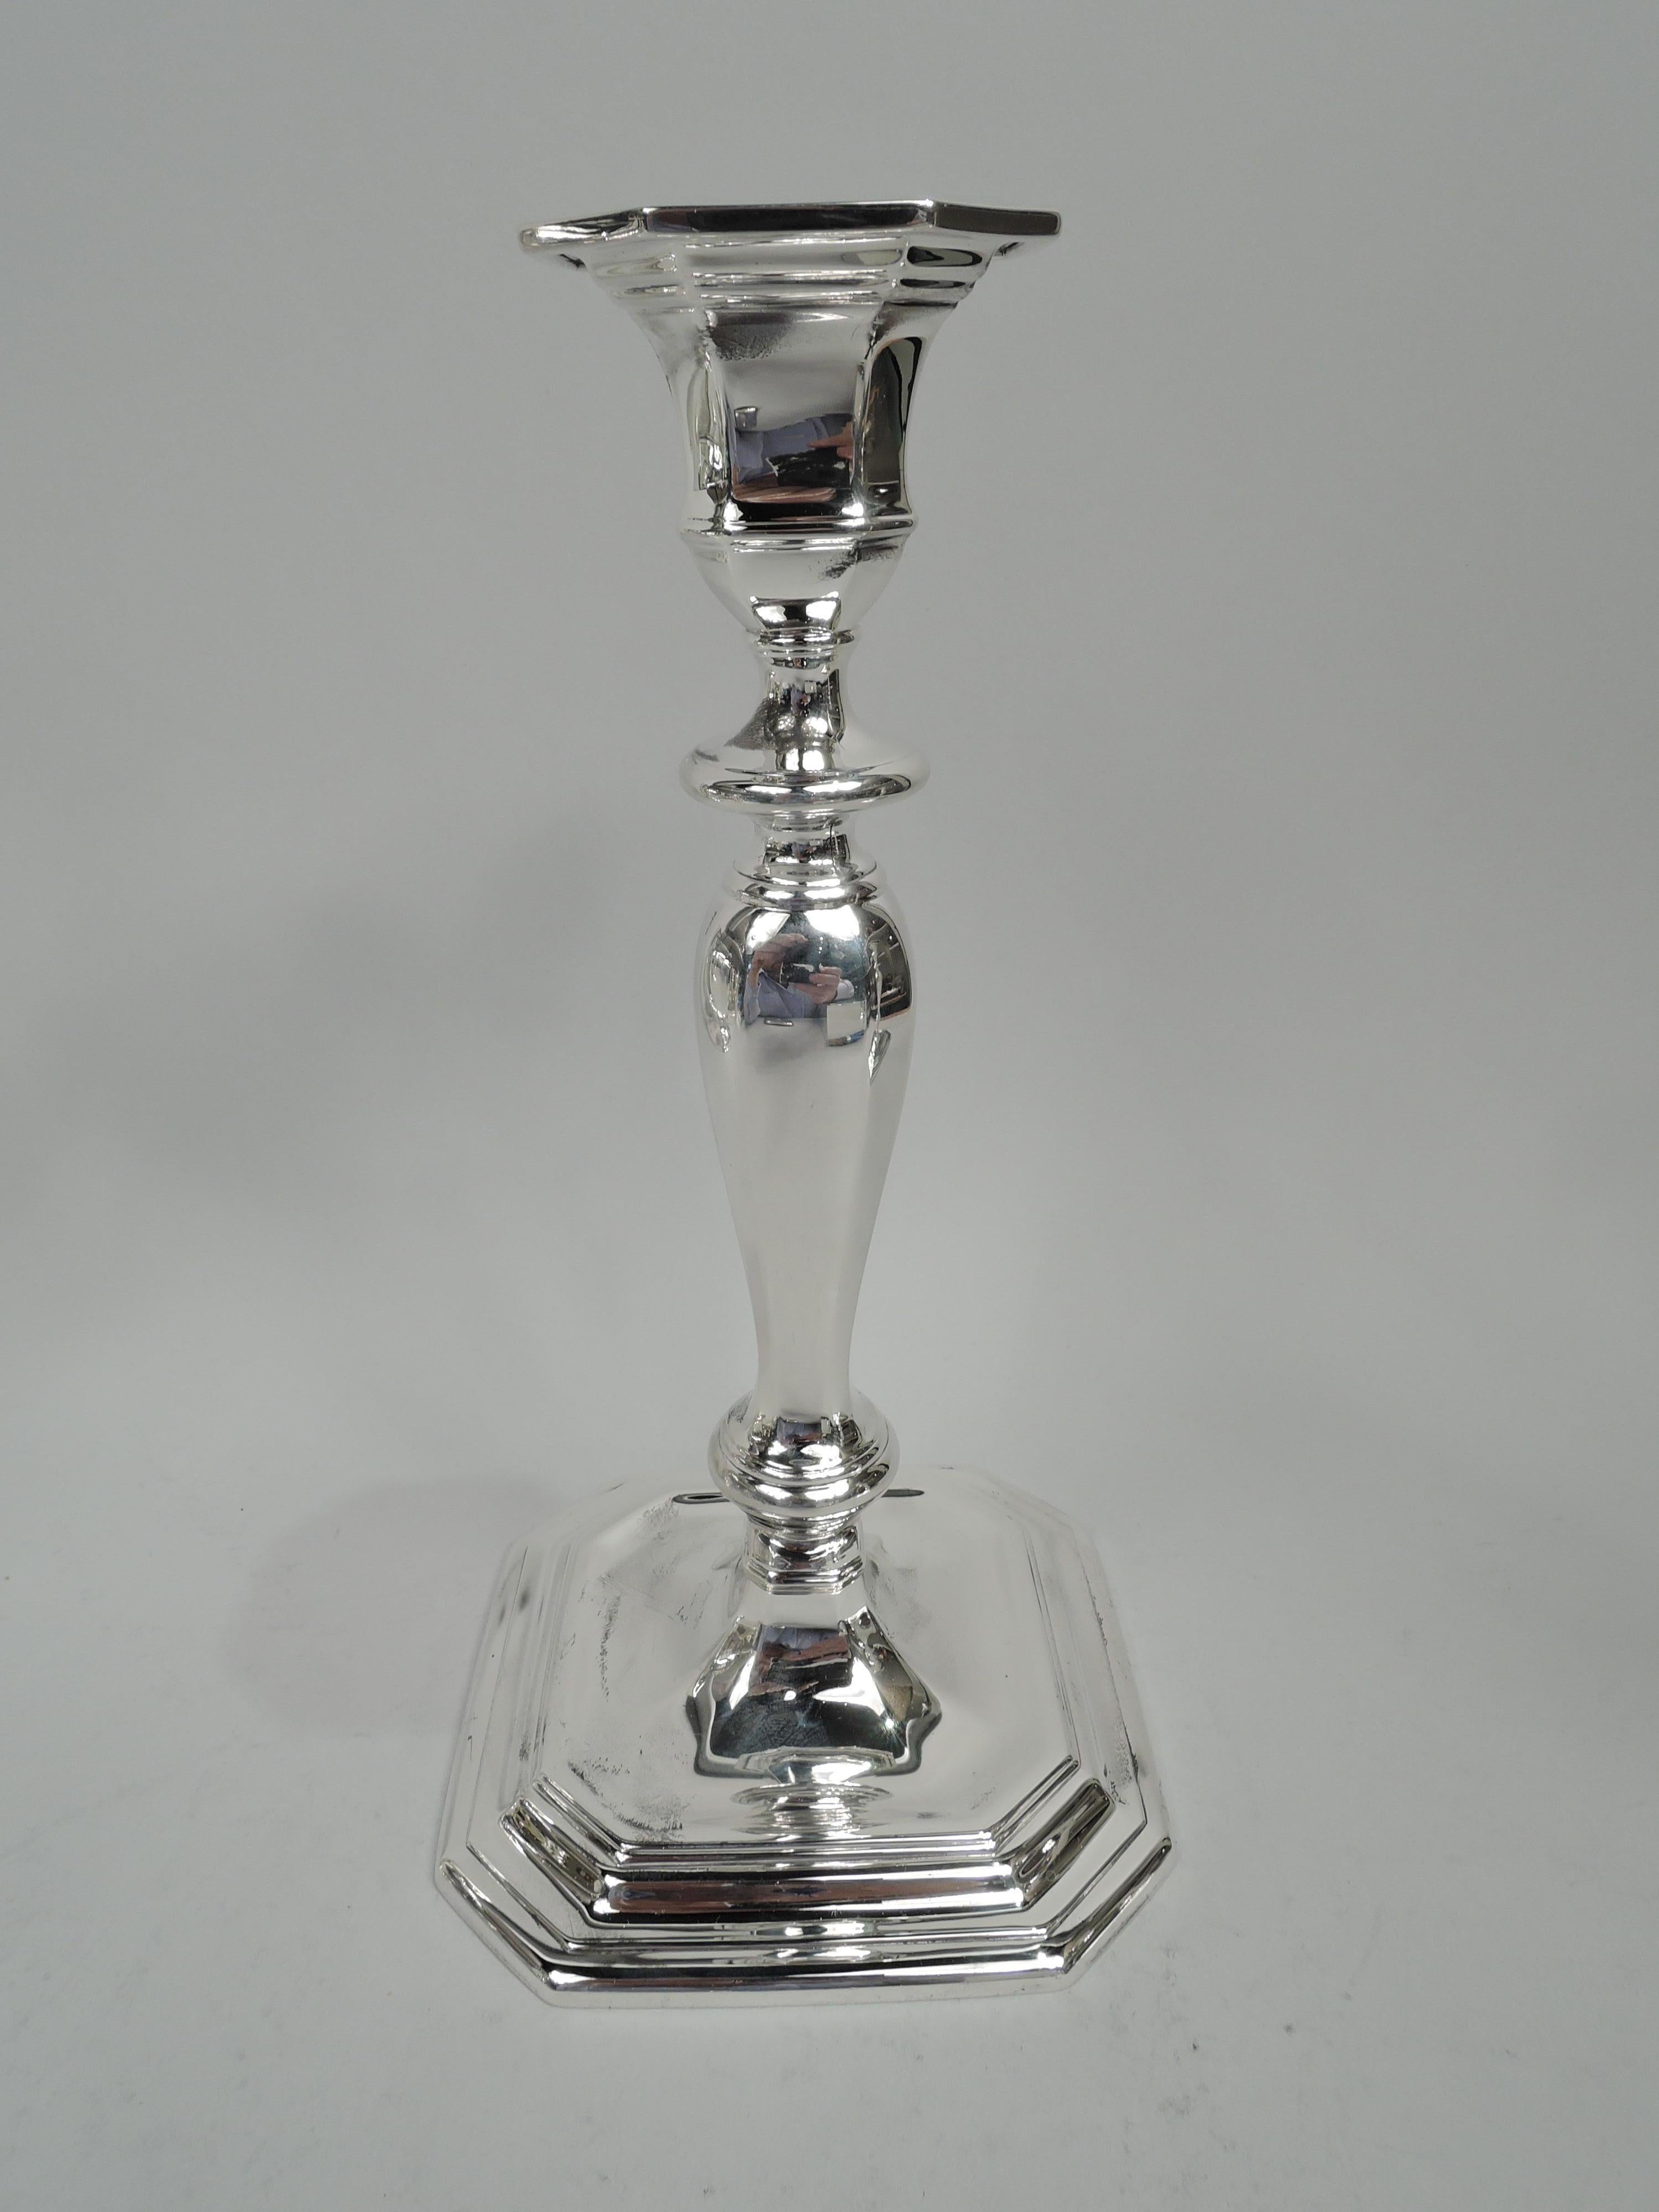 Pair of Georgian sterling silver candlesticks. Made by Tiffany & Co. in New York, ca 1913. Each: Knopped baluster shaft on stepped square base. Urn socket with flat detachable bobeche. Faceting and chamfering. Olden-days form spiffed up for the